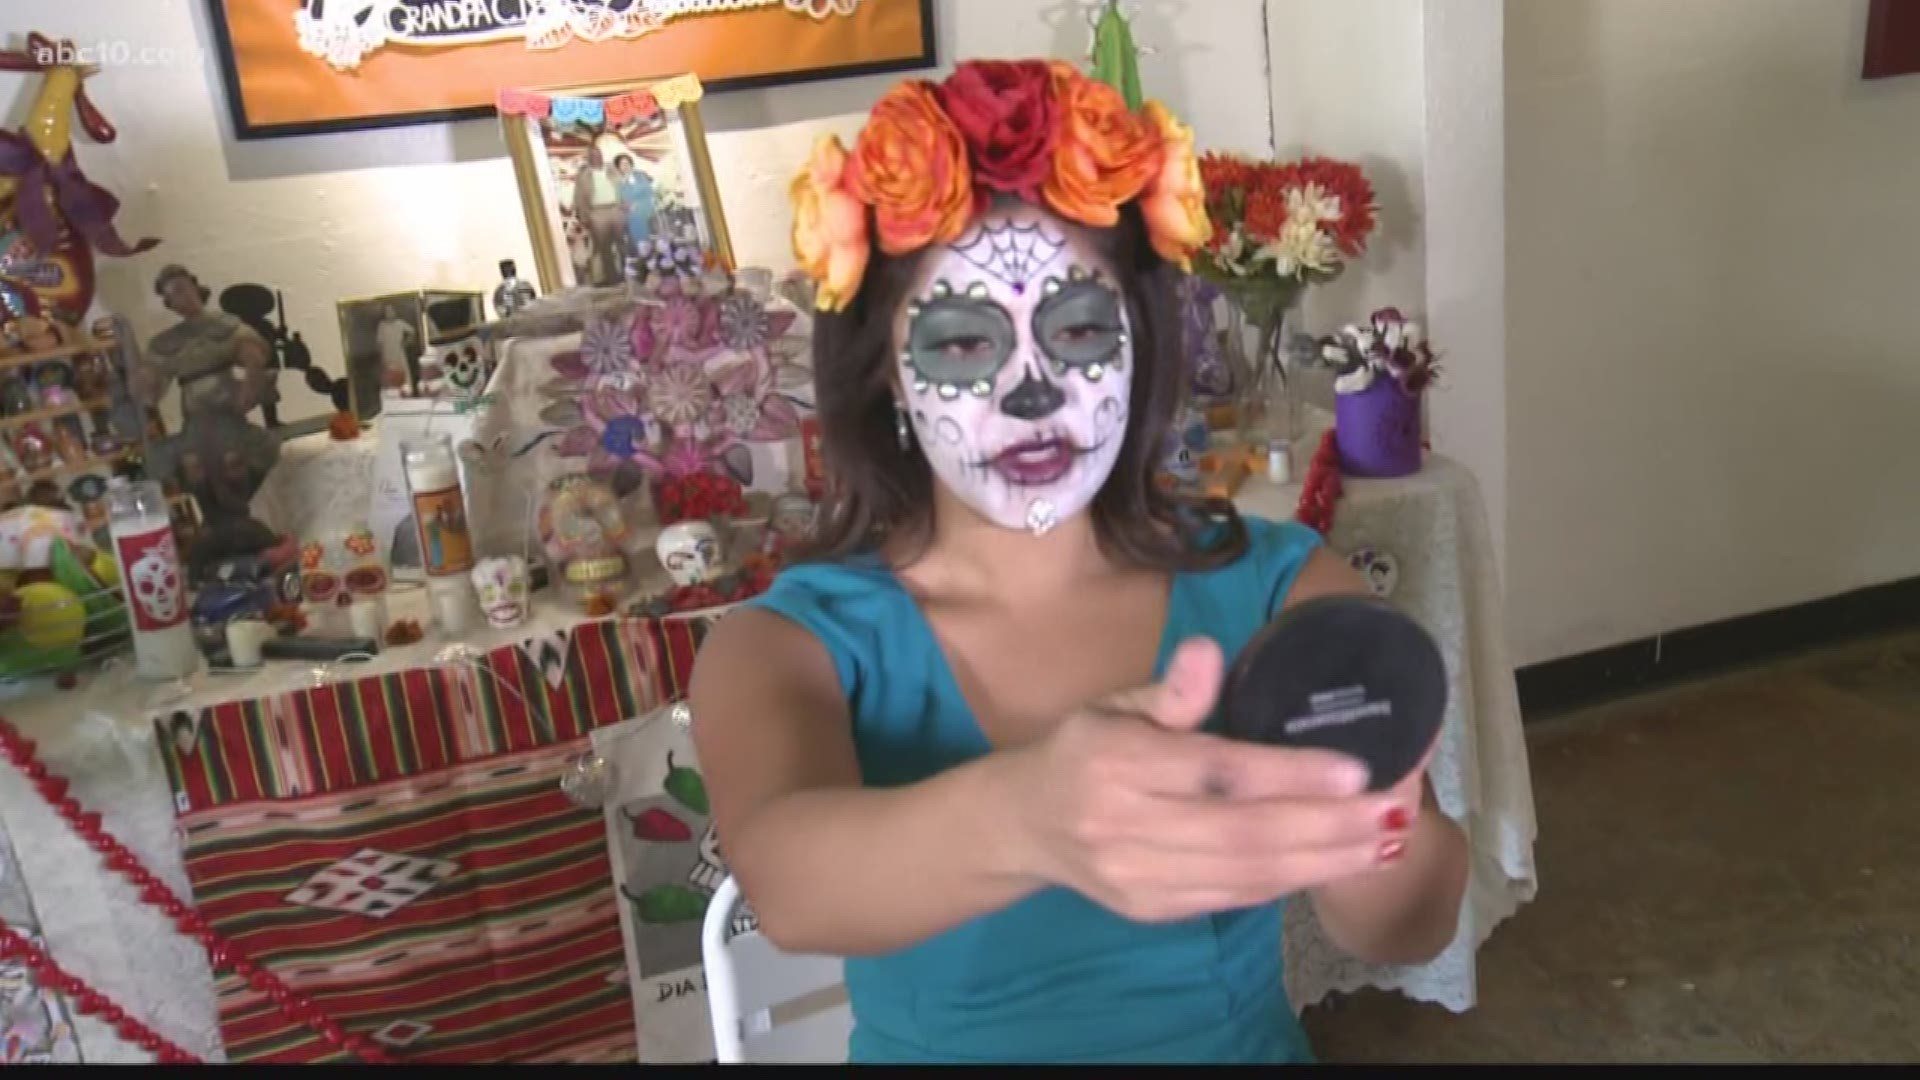 Dia De Los Muertos wrapped up yesterday, but the celebrations continue through the weekend.